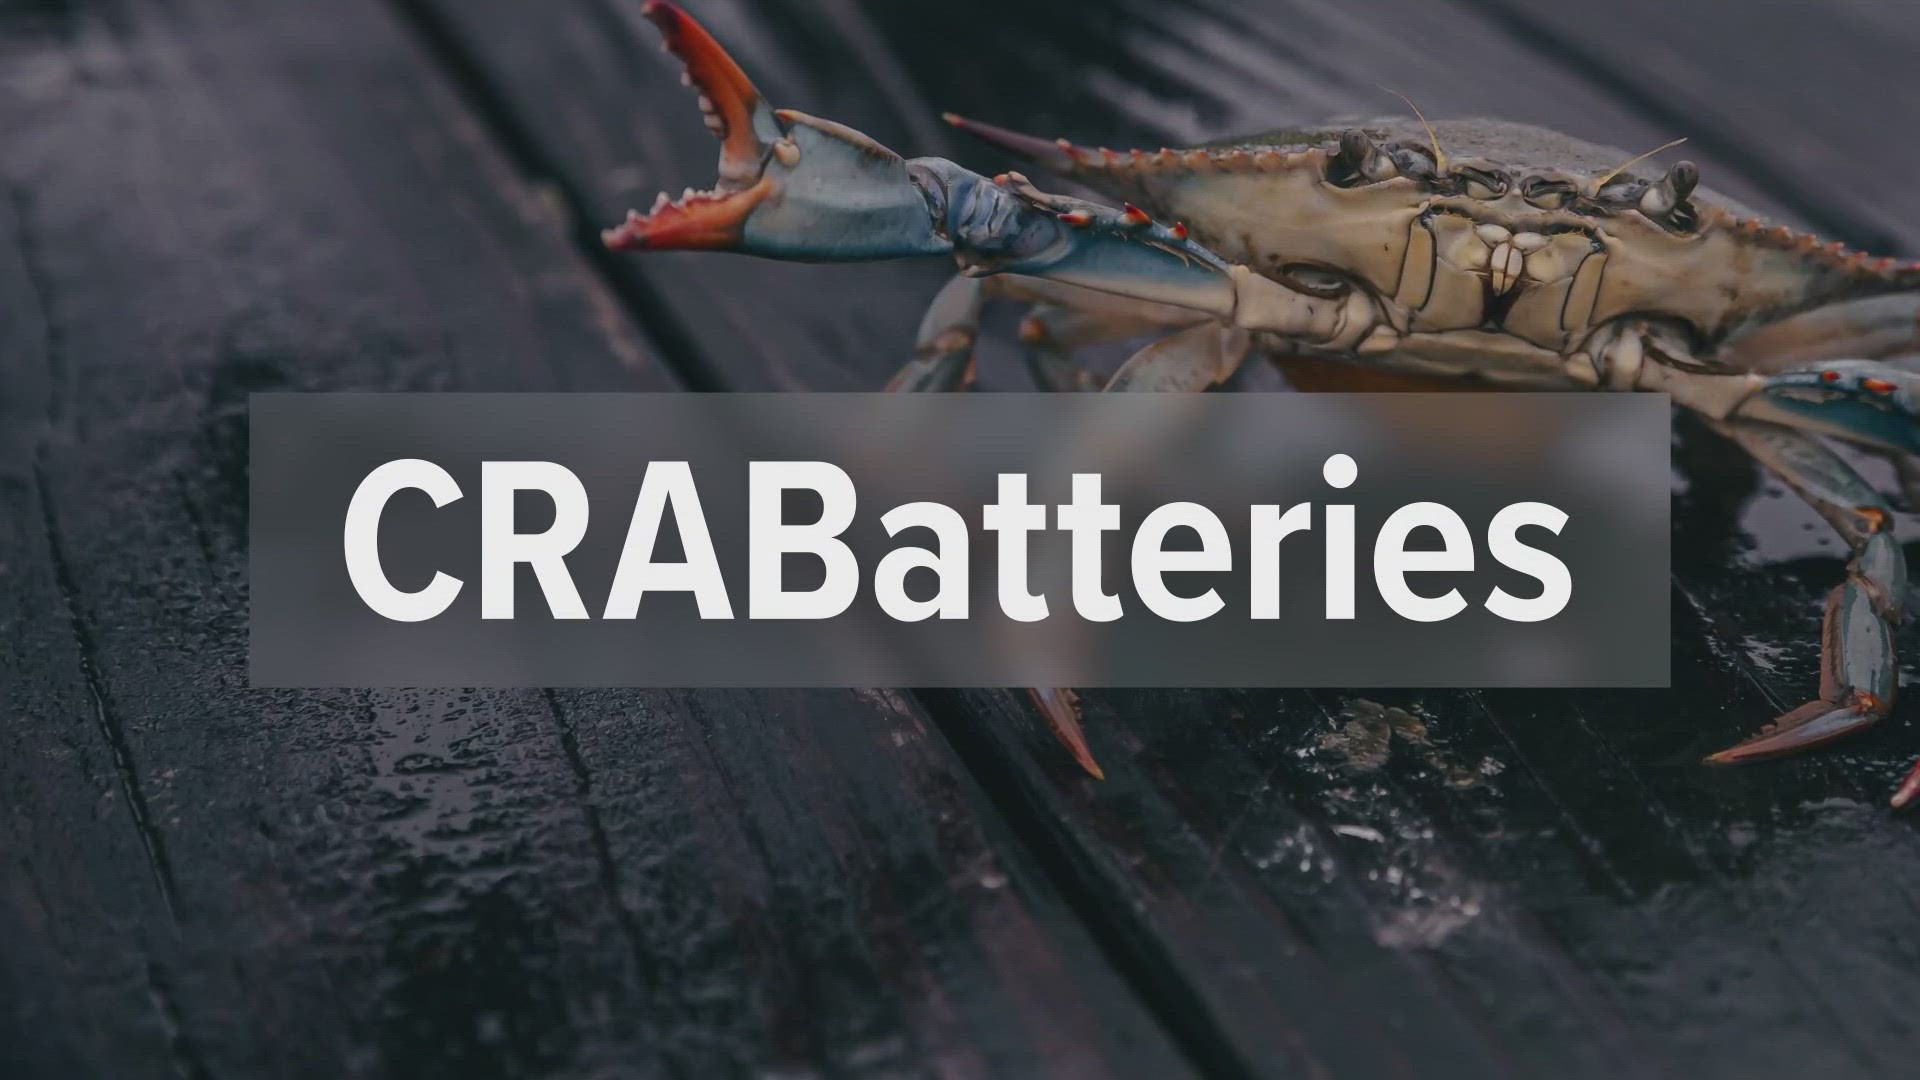 Imagine the battery in your phone being made from crab shells. A group of local engineers are using a biodegradable electrolyte found in the shell to make batteries.